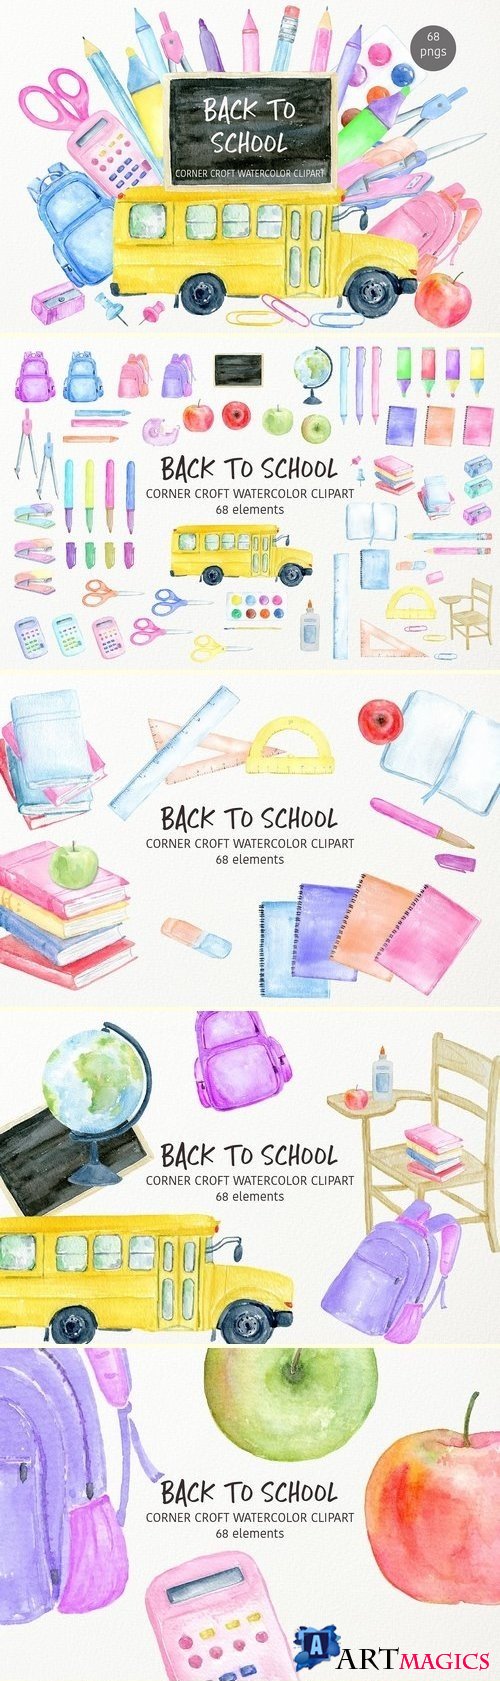 Back to school clipart 2924772